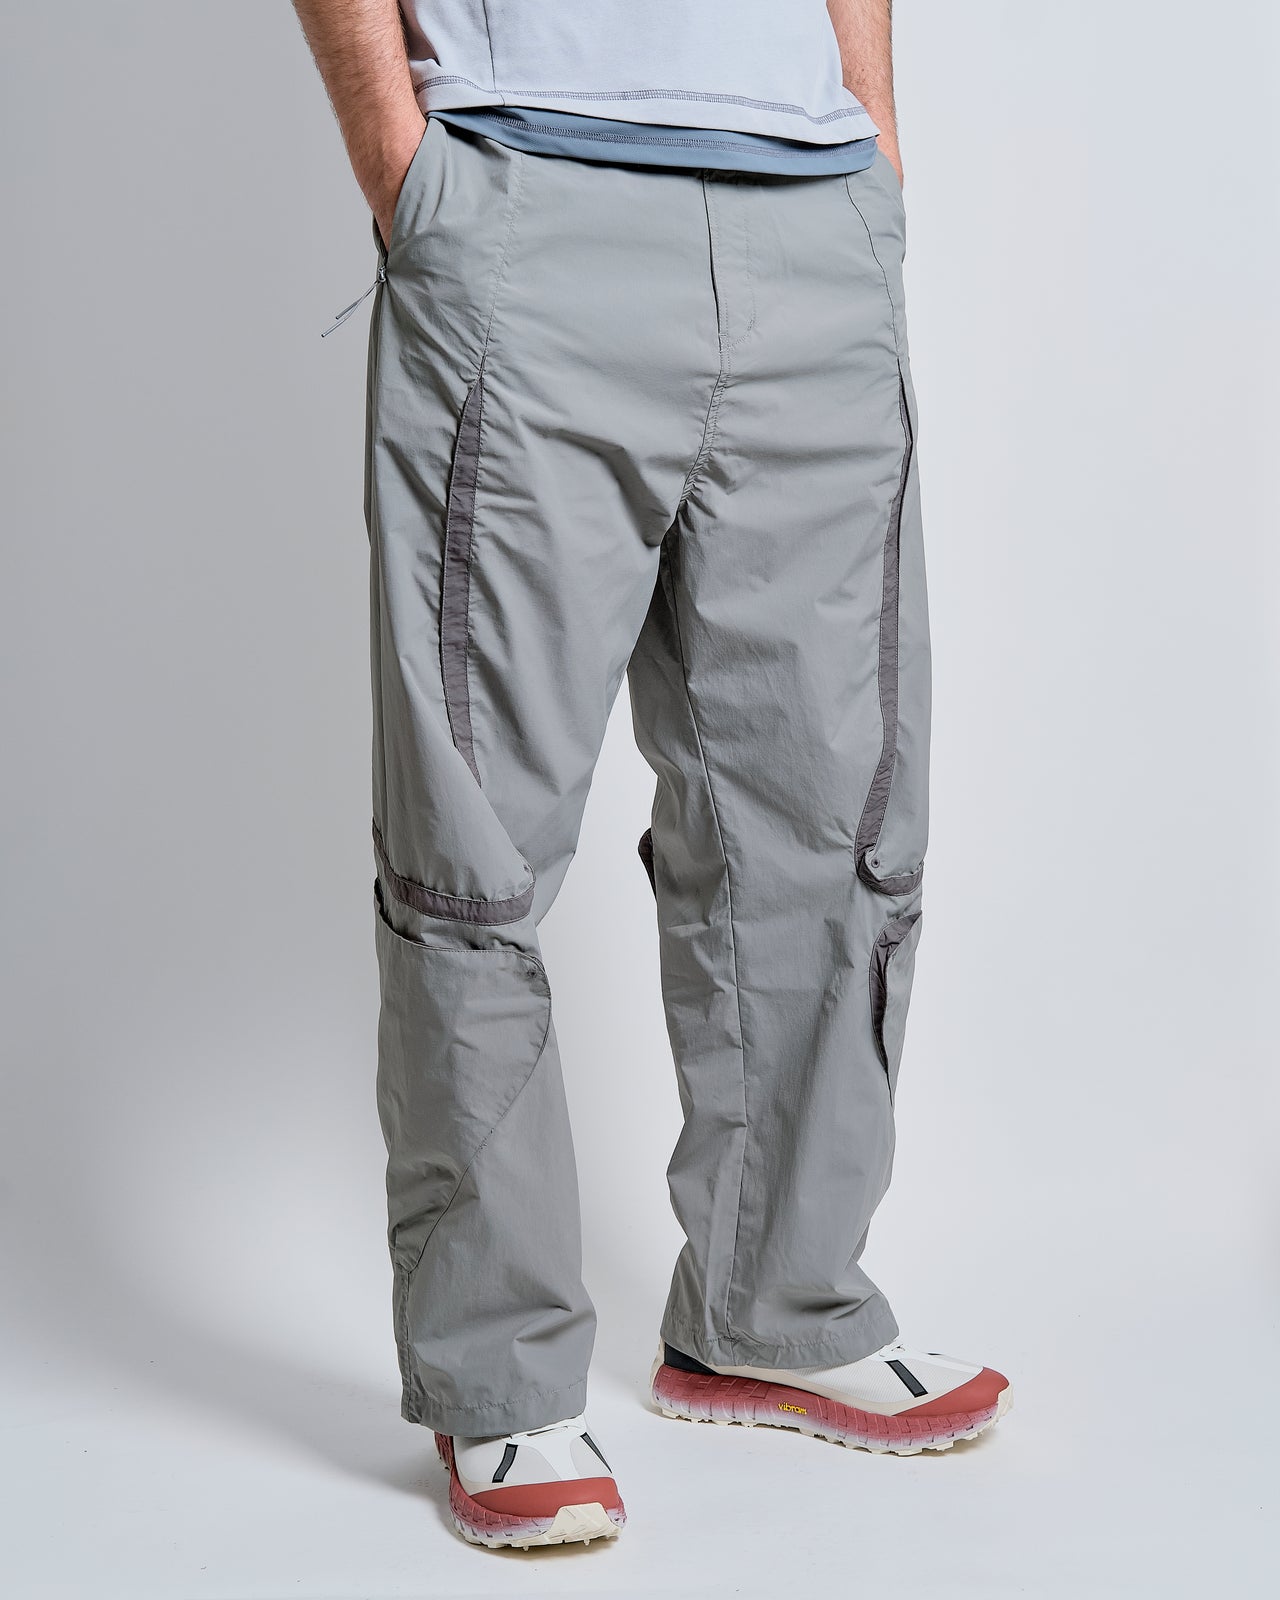 Surround Pants in Warm Grey